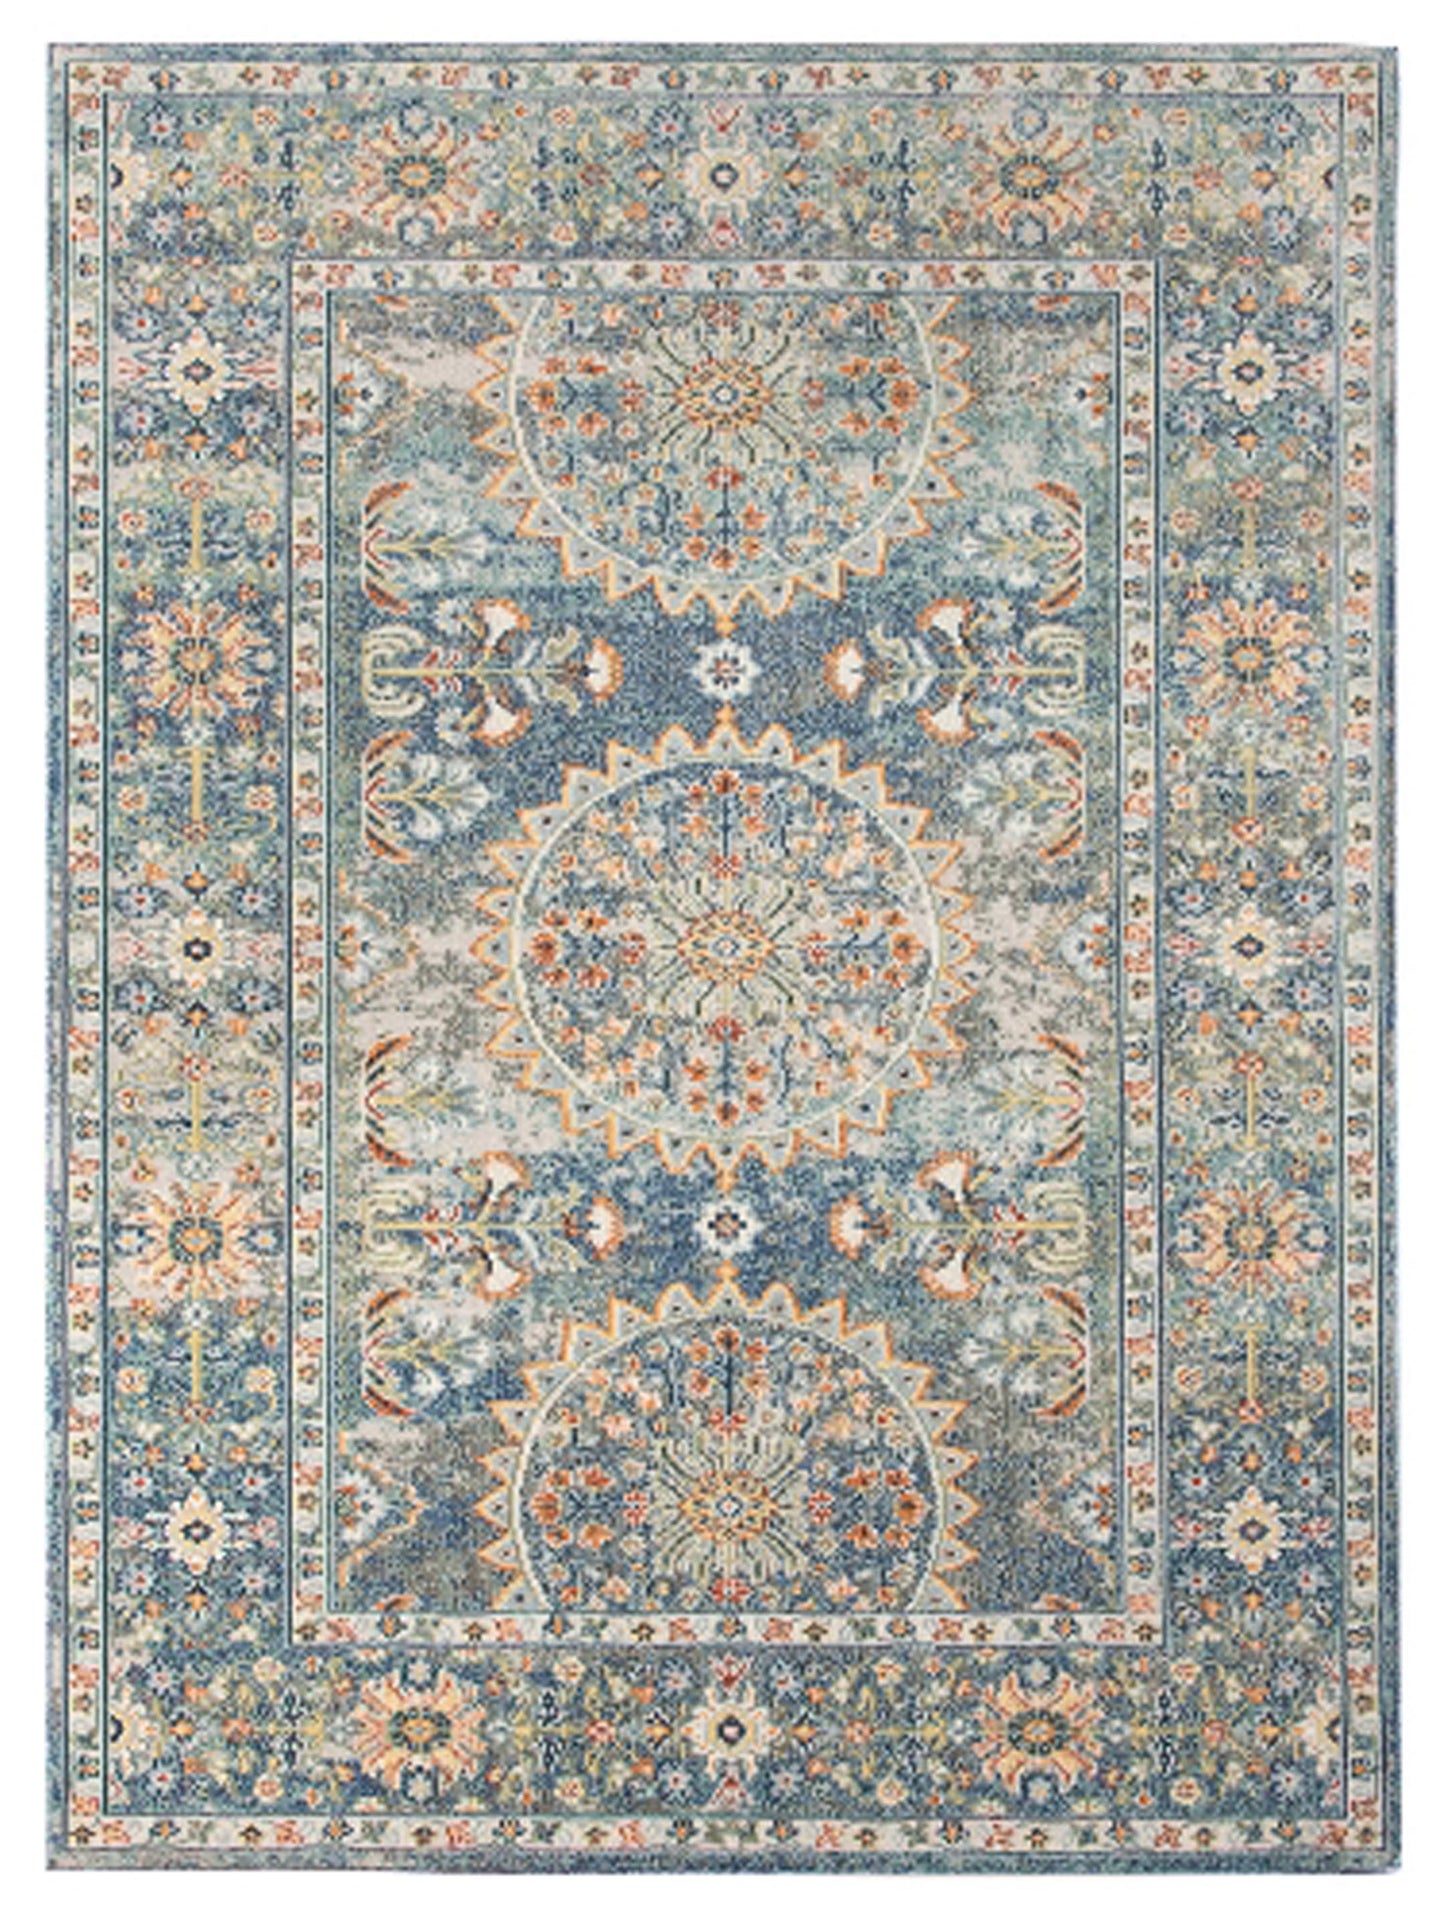 Limited Shay SF-407 BLUE Traditional Machinemade Rug